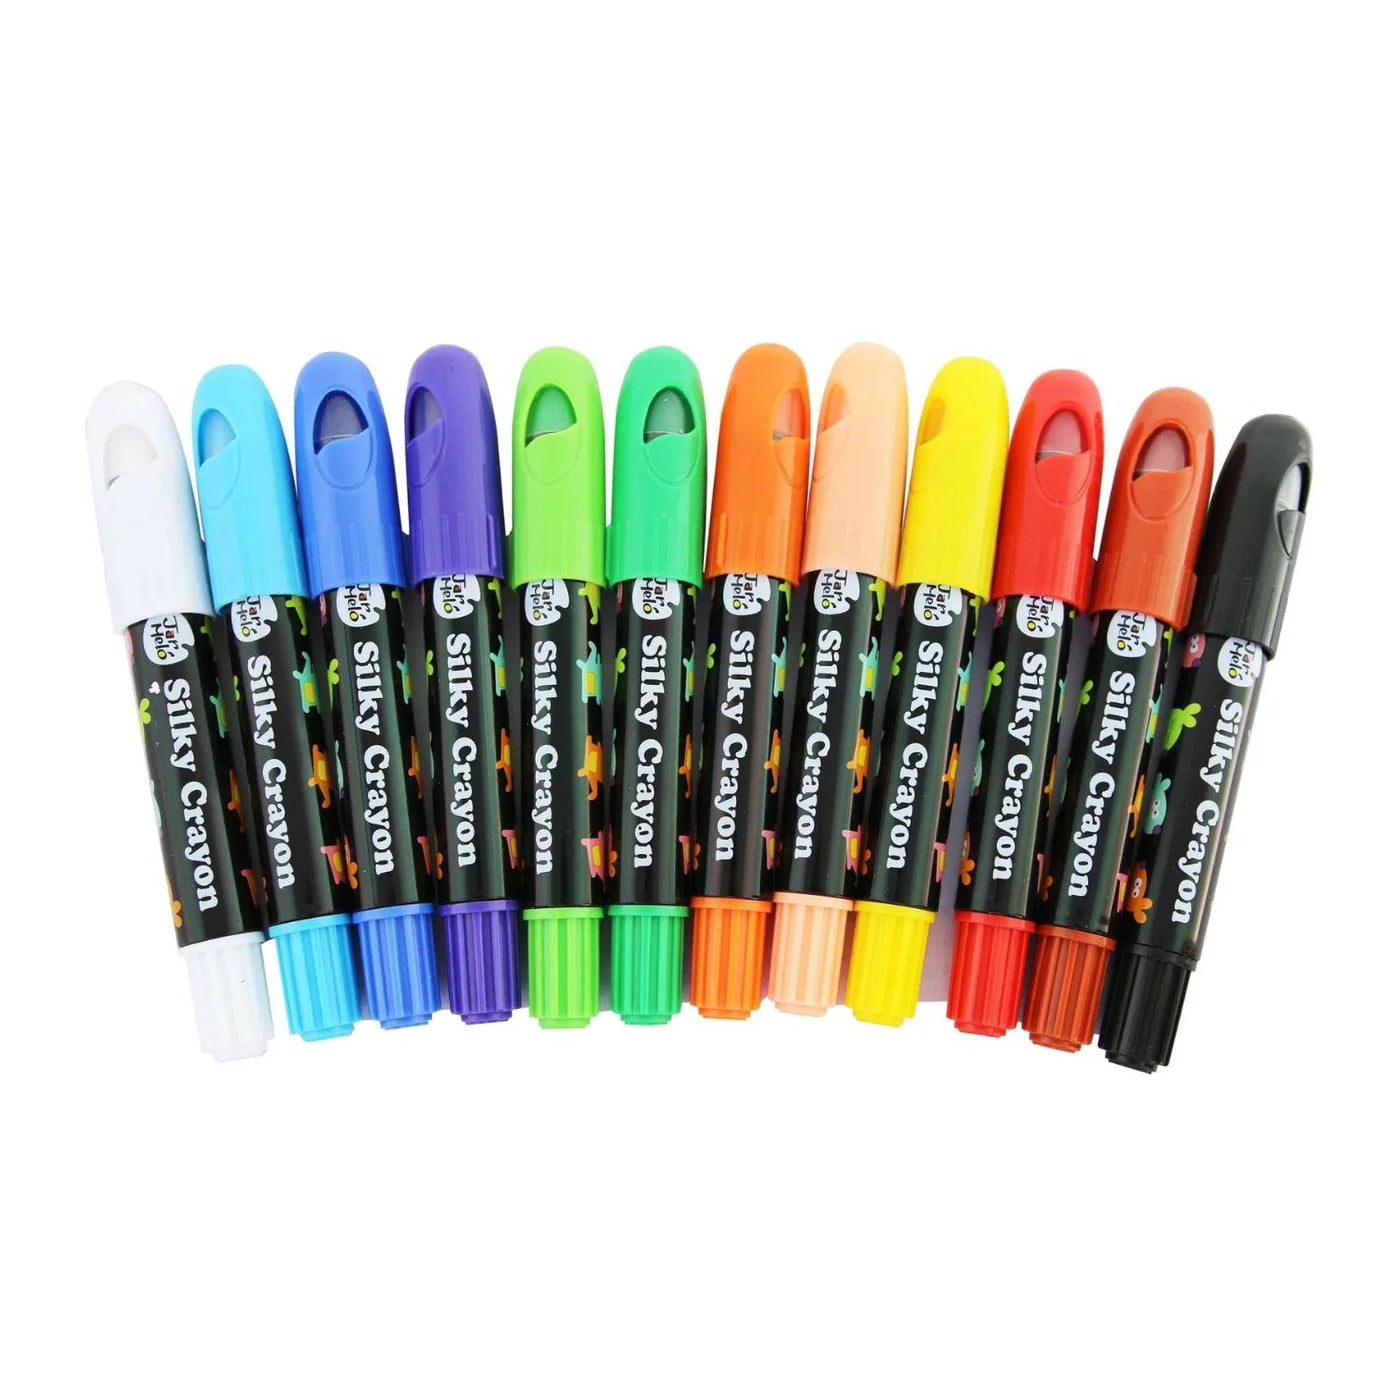 Jarmelo Washable Silky Crayons